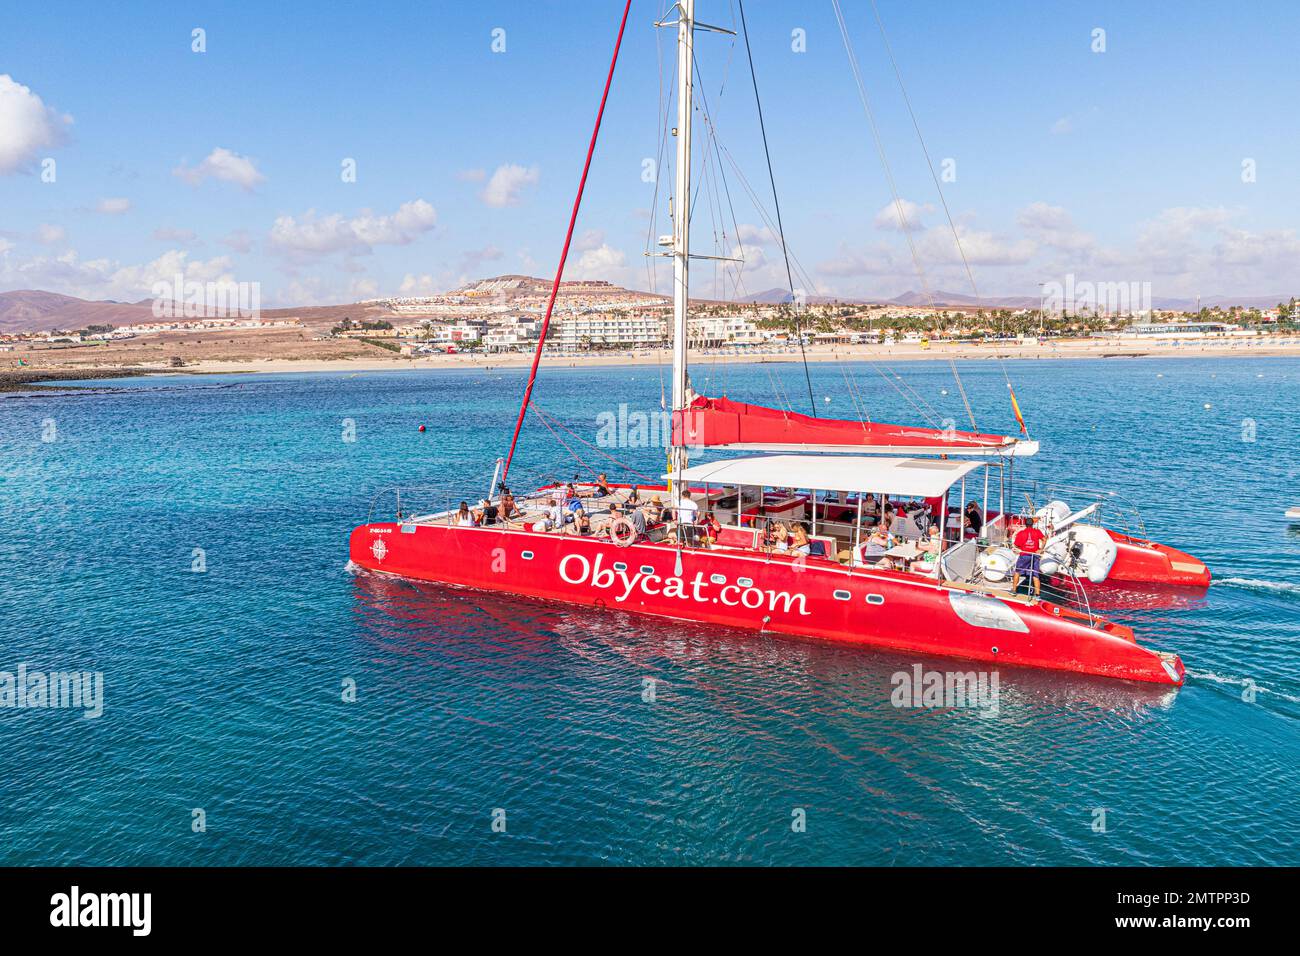 Tourists aboard the Obycat Experience catamaran leaving the harbour at Caleta de Fuste on the east coast of the Canary Island of Fuerteventura, Spain Stock Photo